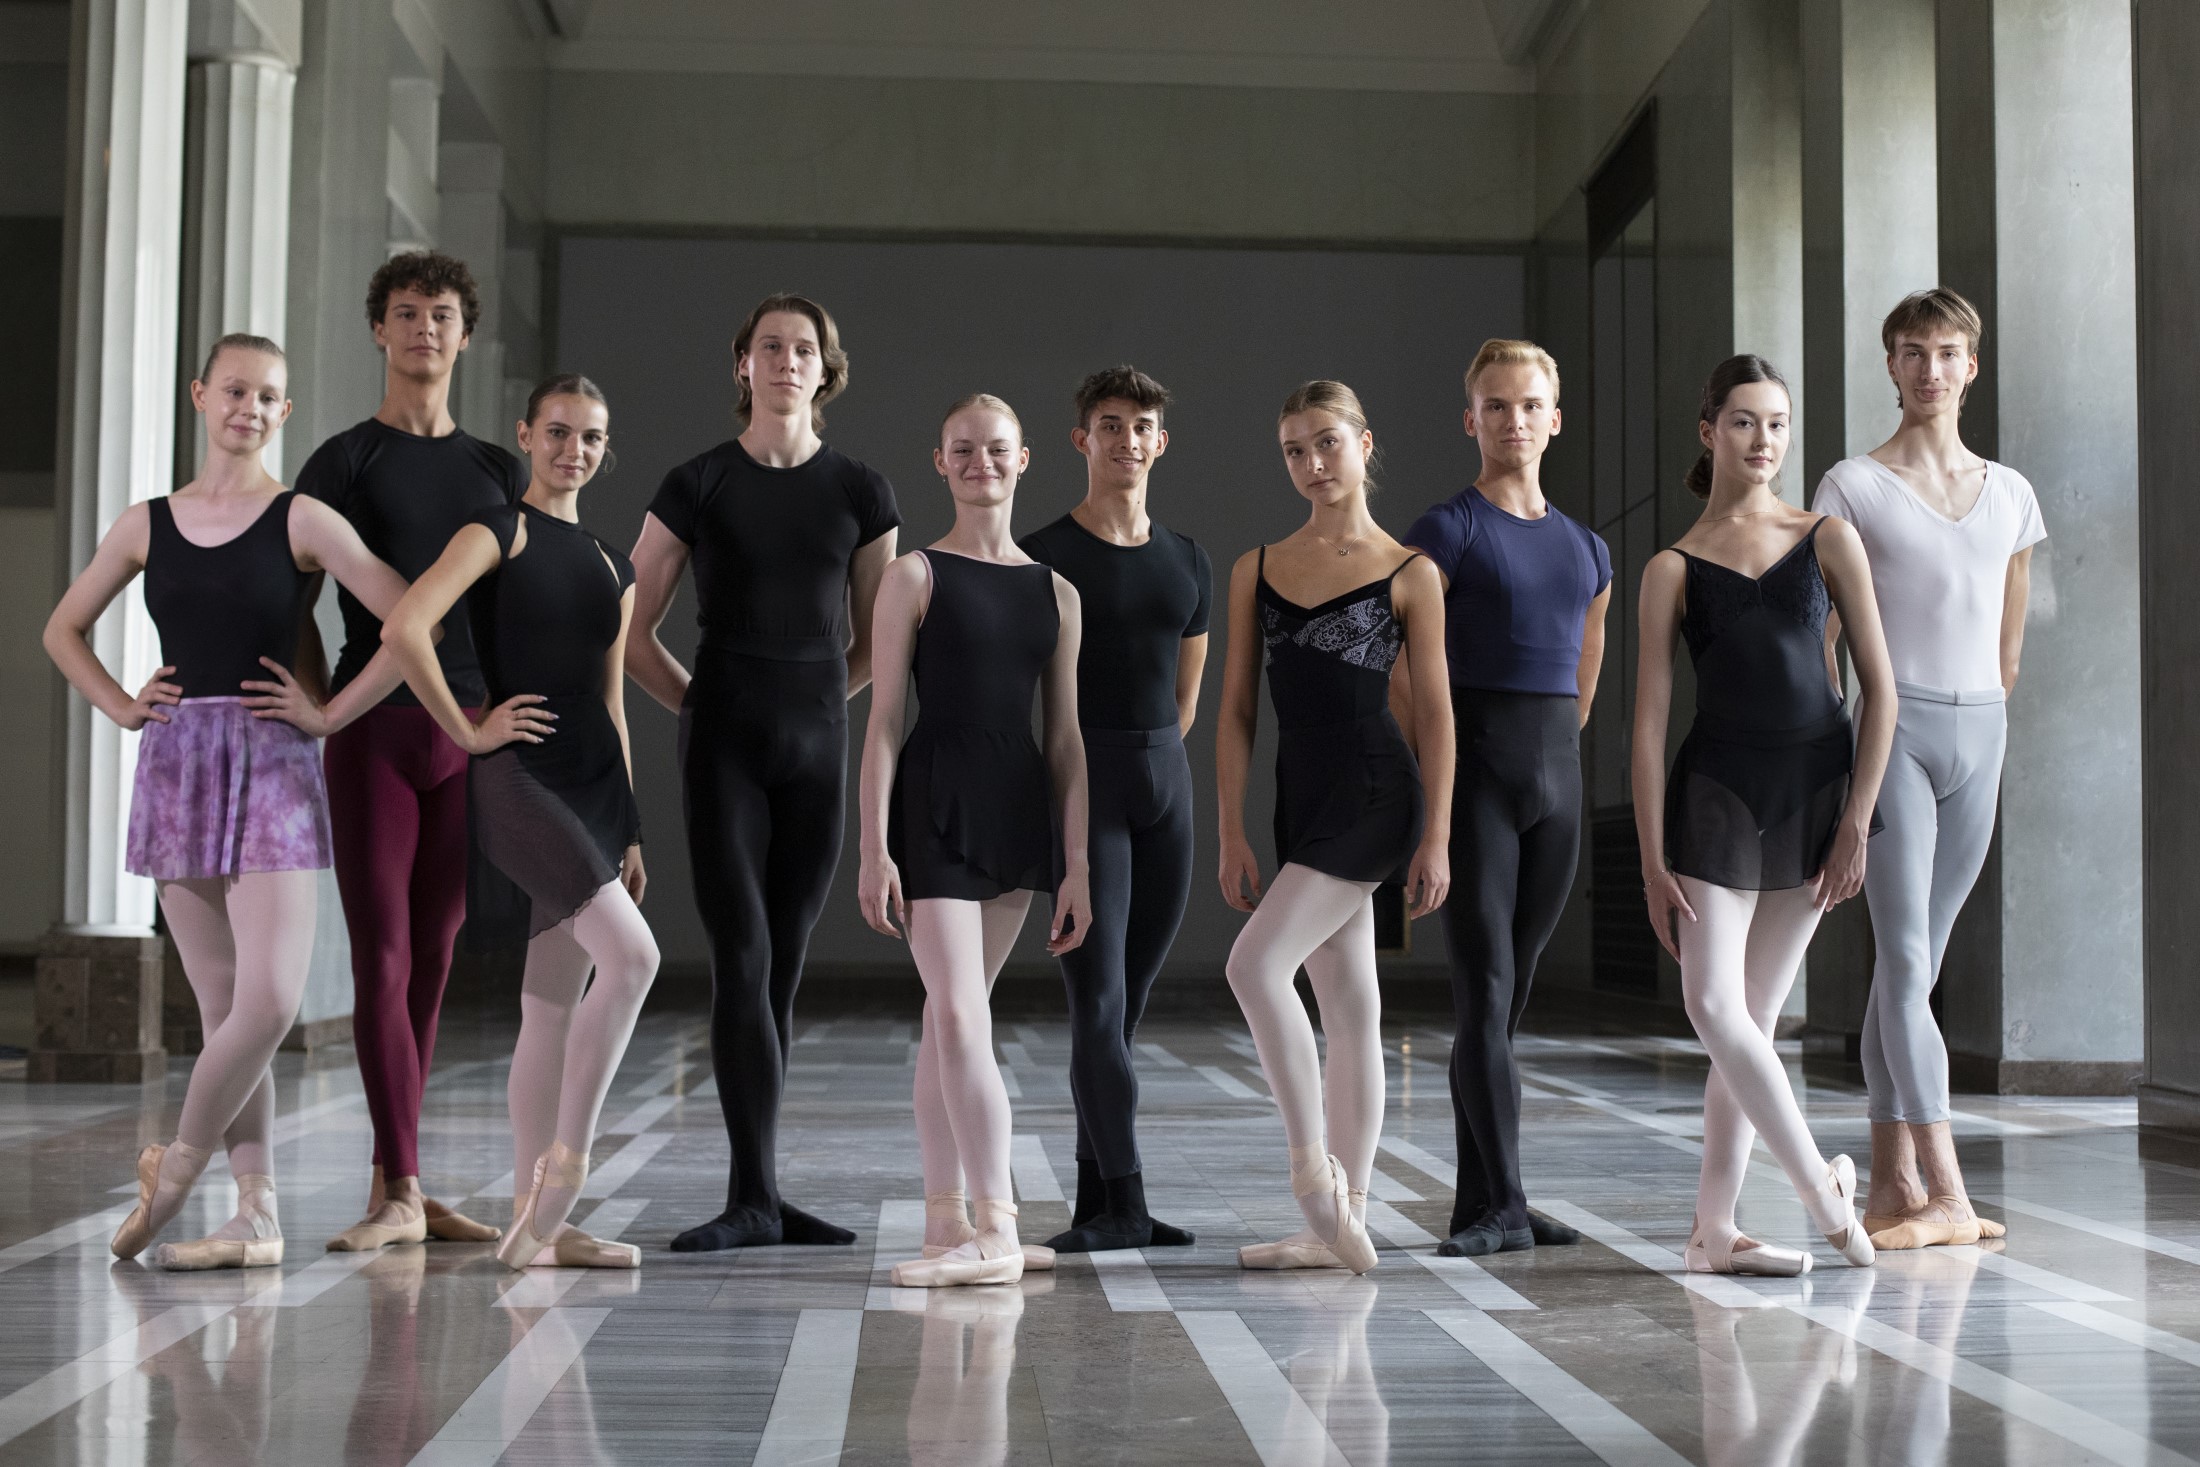 Ten young ballet dancers in dance poses in the lobby of the Polish National Opera